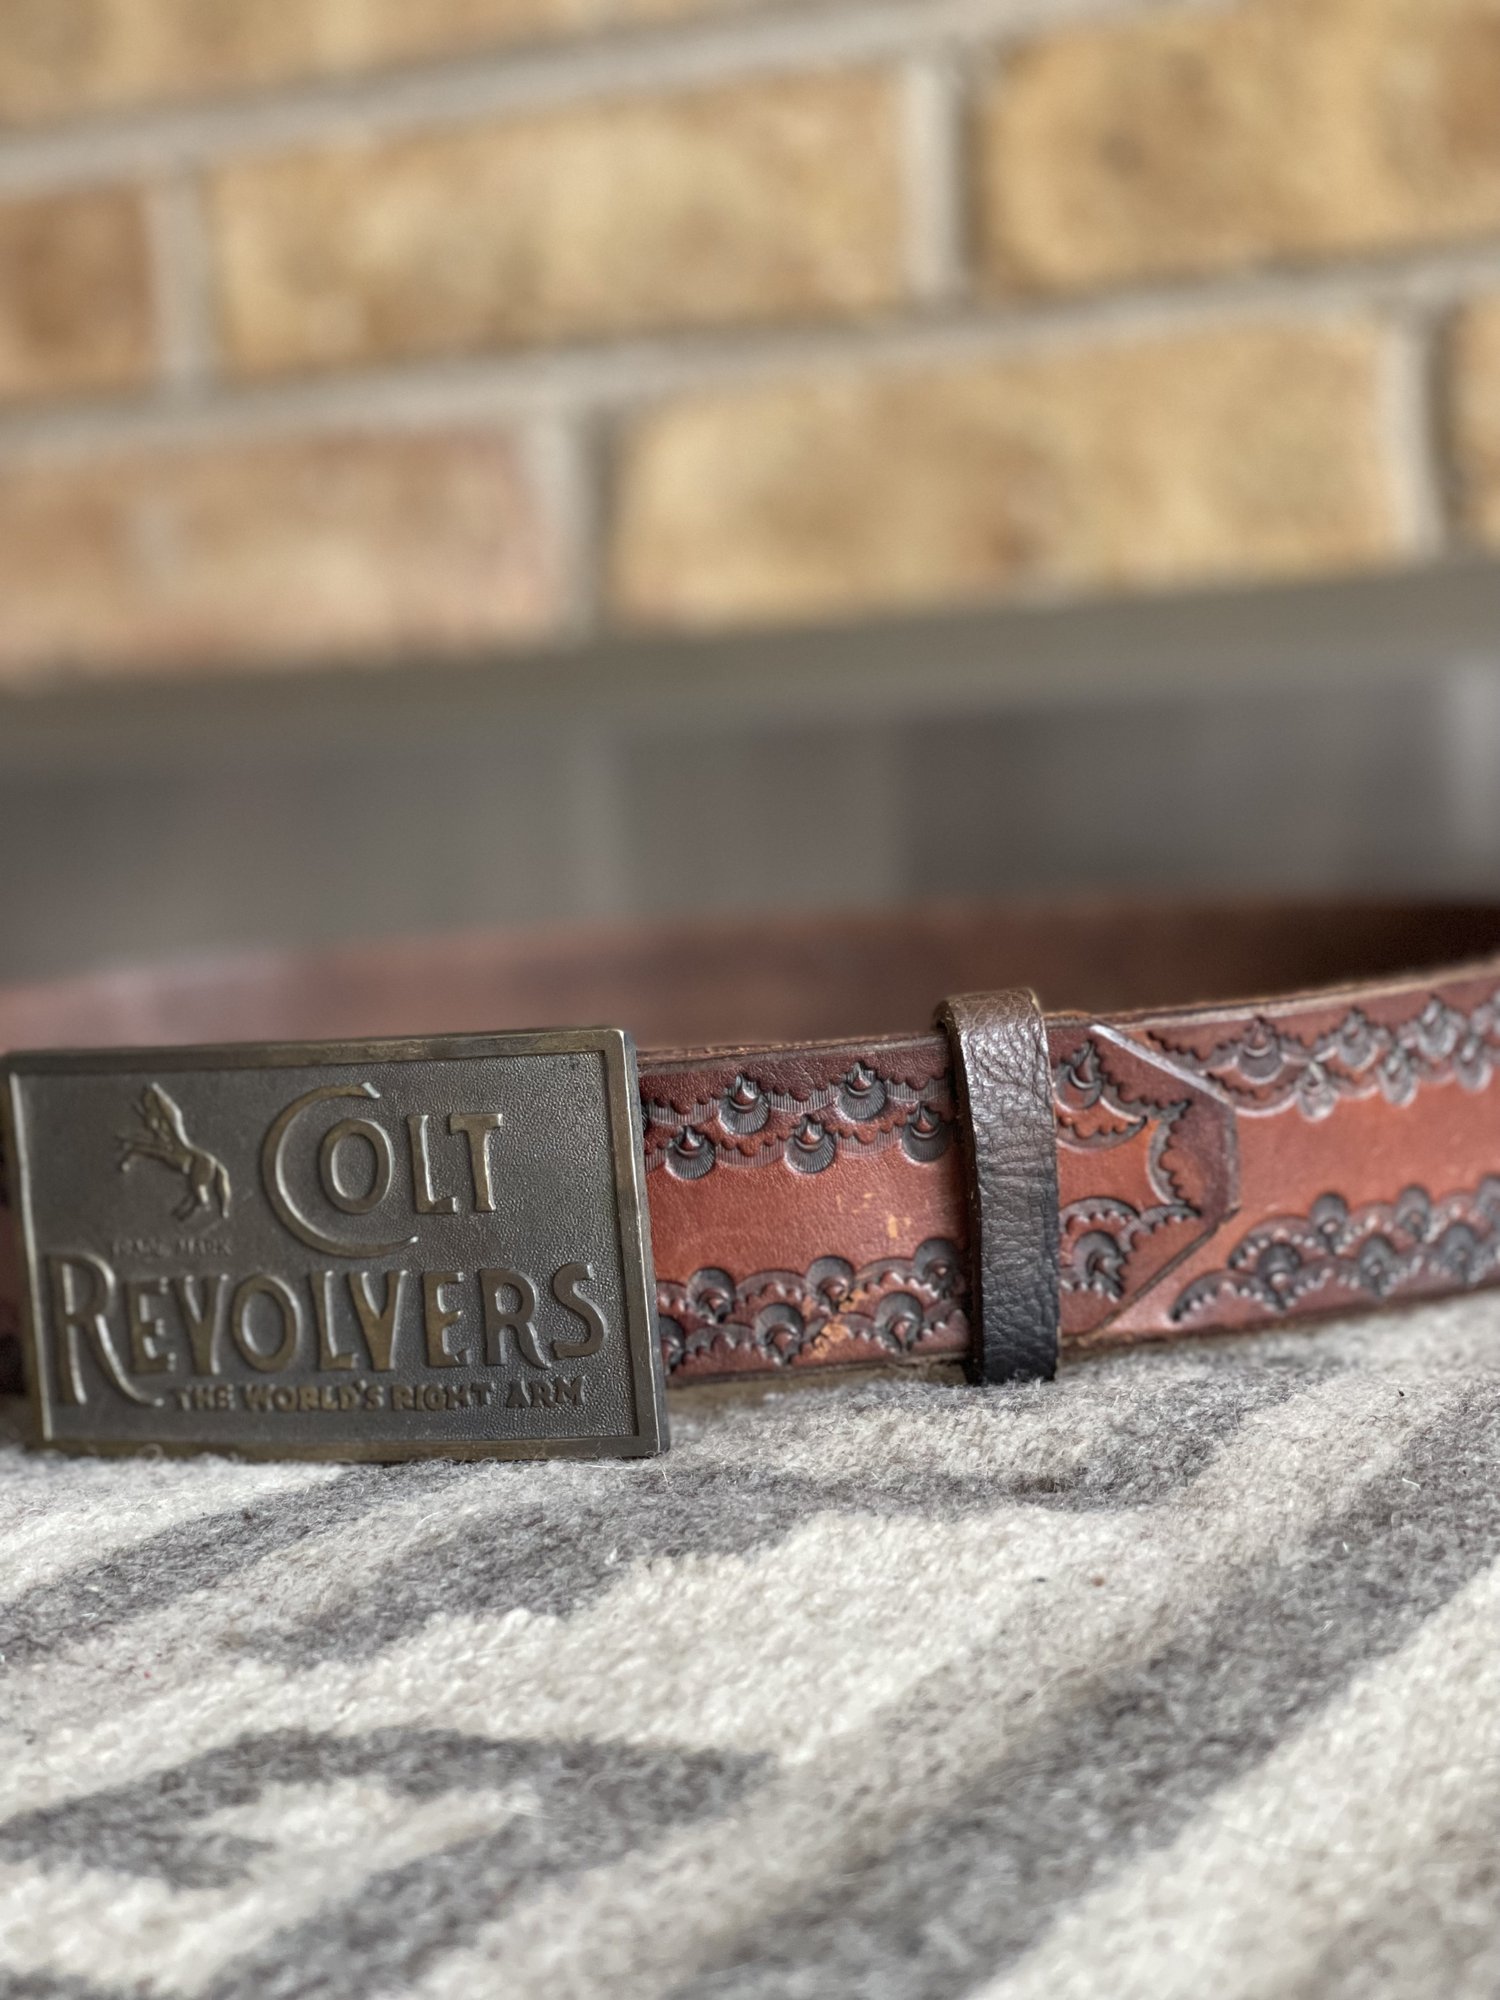 Gordy's Vintage Leather Tooled and Laced Wallet - Handcrafted